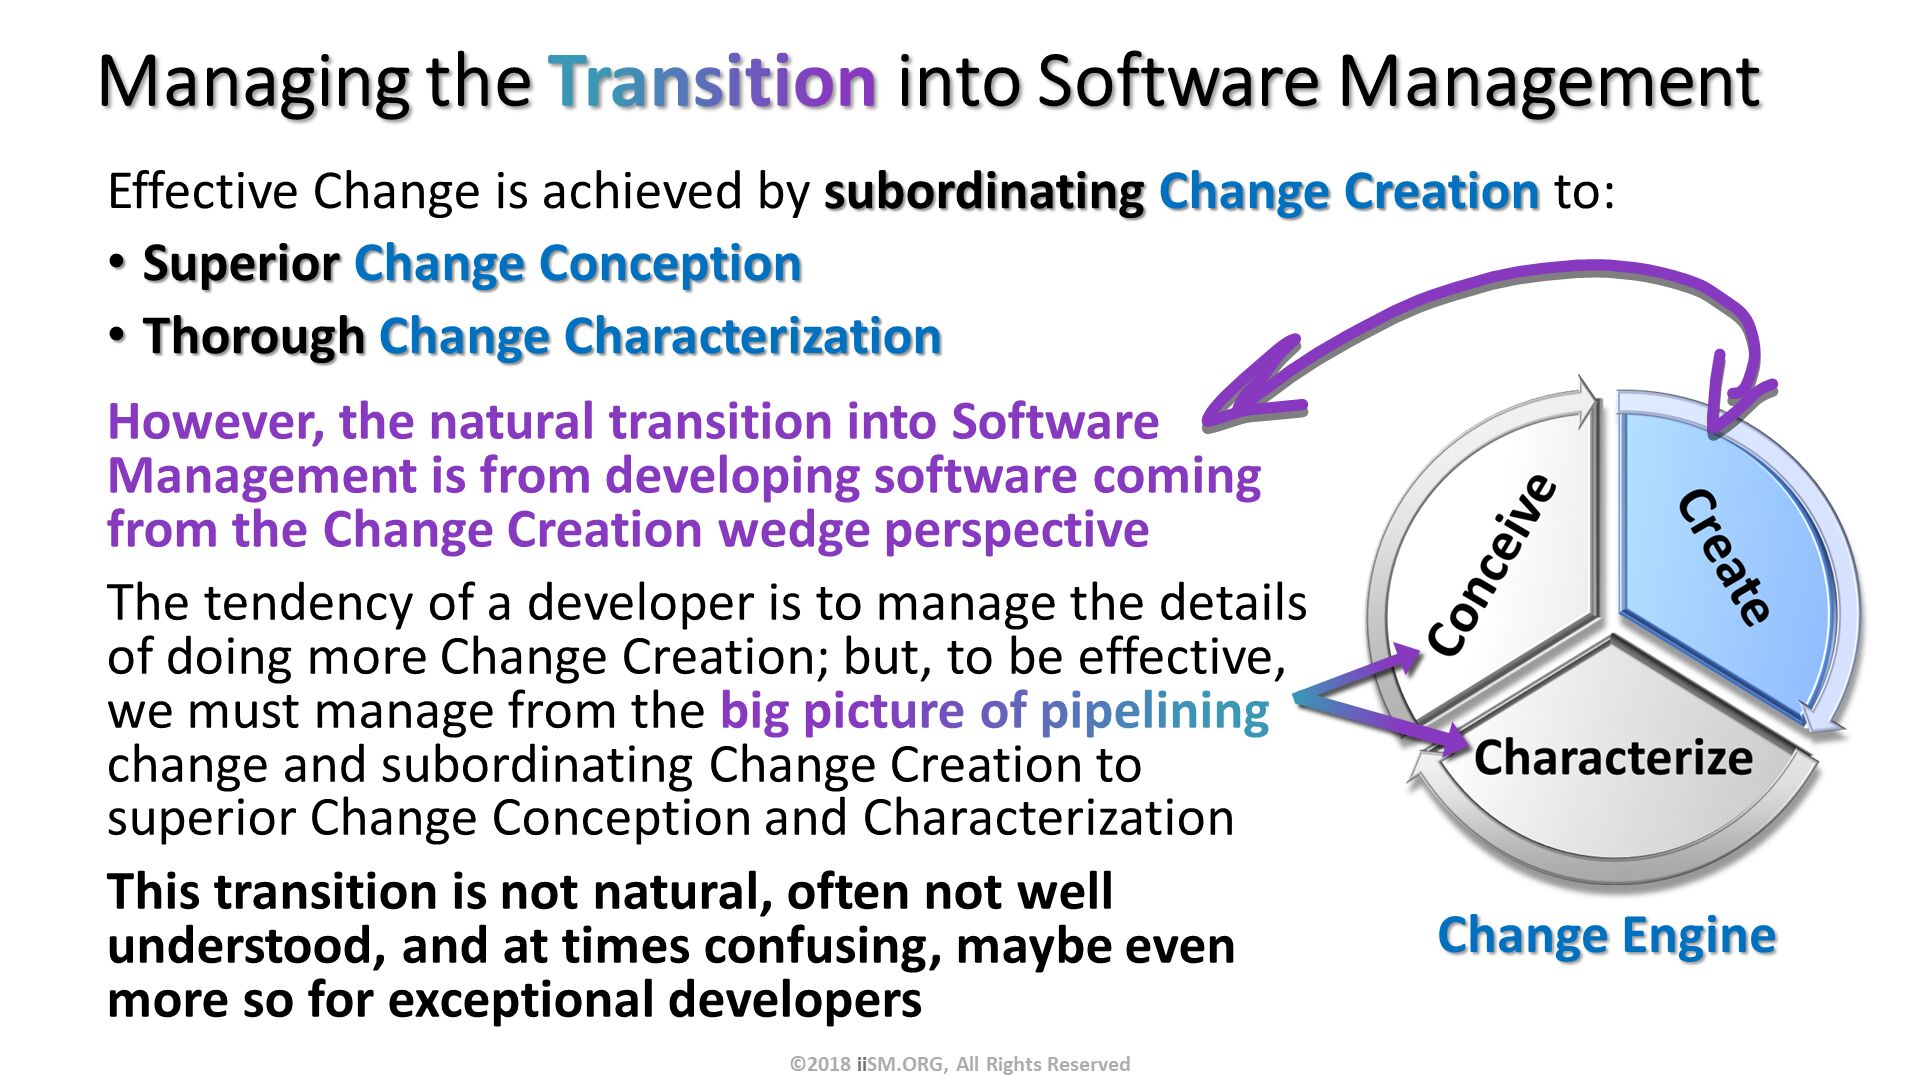 Managing the Transition into Software Management. Effective Change is achieved by subordinating Change Creation to:
Superior Change Conception
Thorough Change Characterization. ©2018 iiSM.ORG, All Rights Reserved. However, the natural transition into Software Management is from developing software coming from the Change Creation wedge perspective. Change Engine . The tendency of a developer is to manage the details of doing more Change Creation; but, to be effective, we must manage from the big picture of pipelining change and subordinating Change Creation to superior Change Conception and Characterization
This transition is not natural, often not well understood, and at times confusing, maybe even more so for exceptional developers
. 